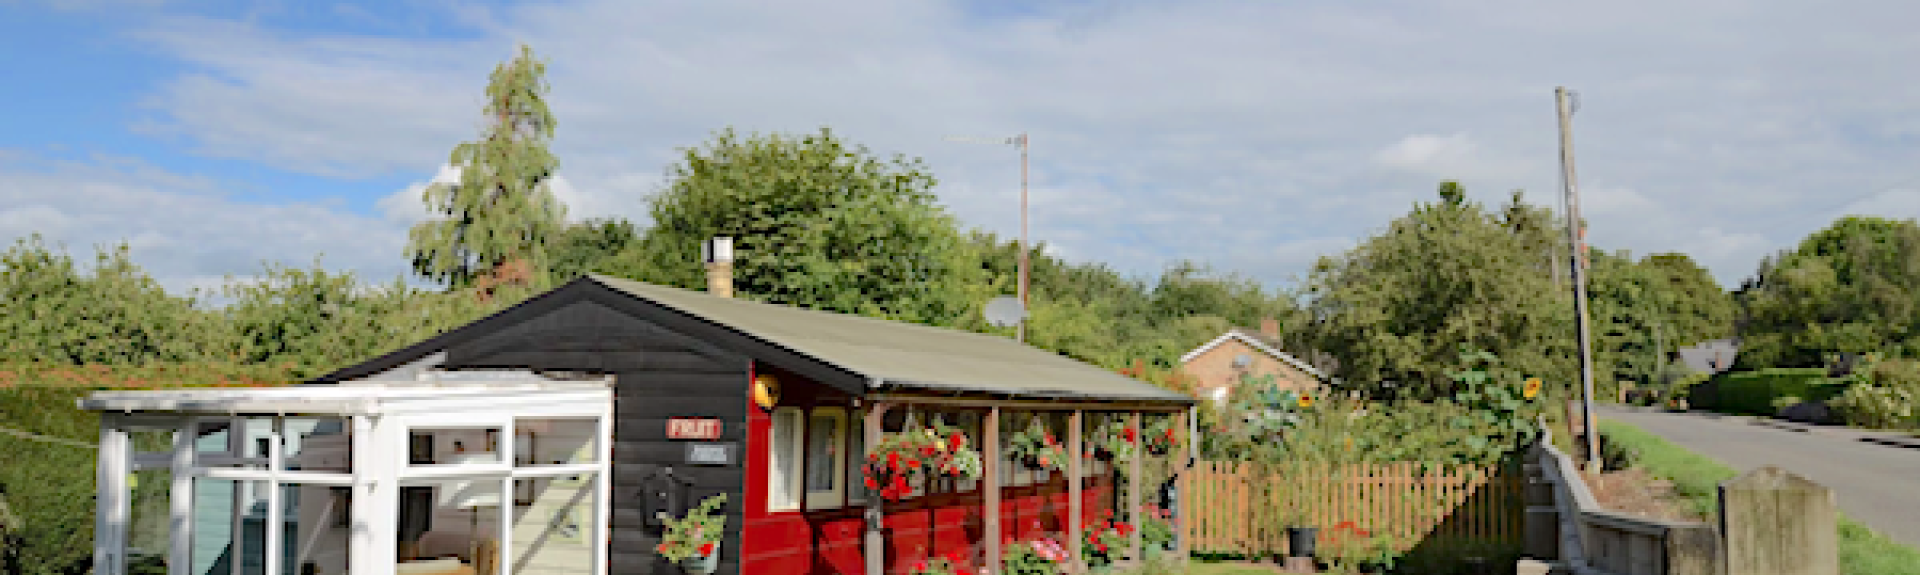 A restored old railway carriage converted to a self-catering holiday home festooned with flowers stands in a well-kept garden in Wisbech on a sunny day